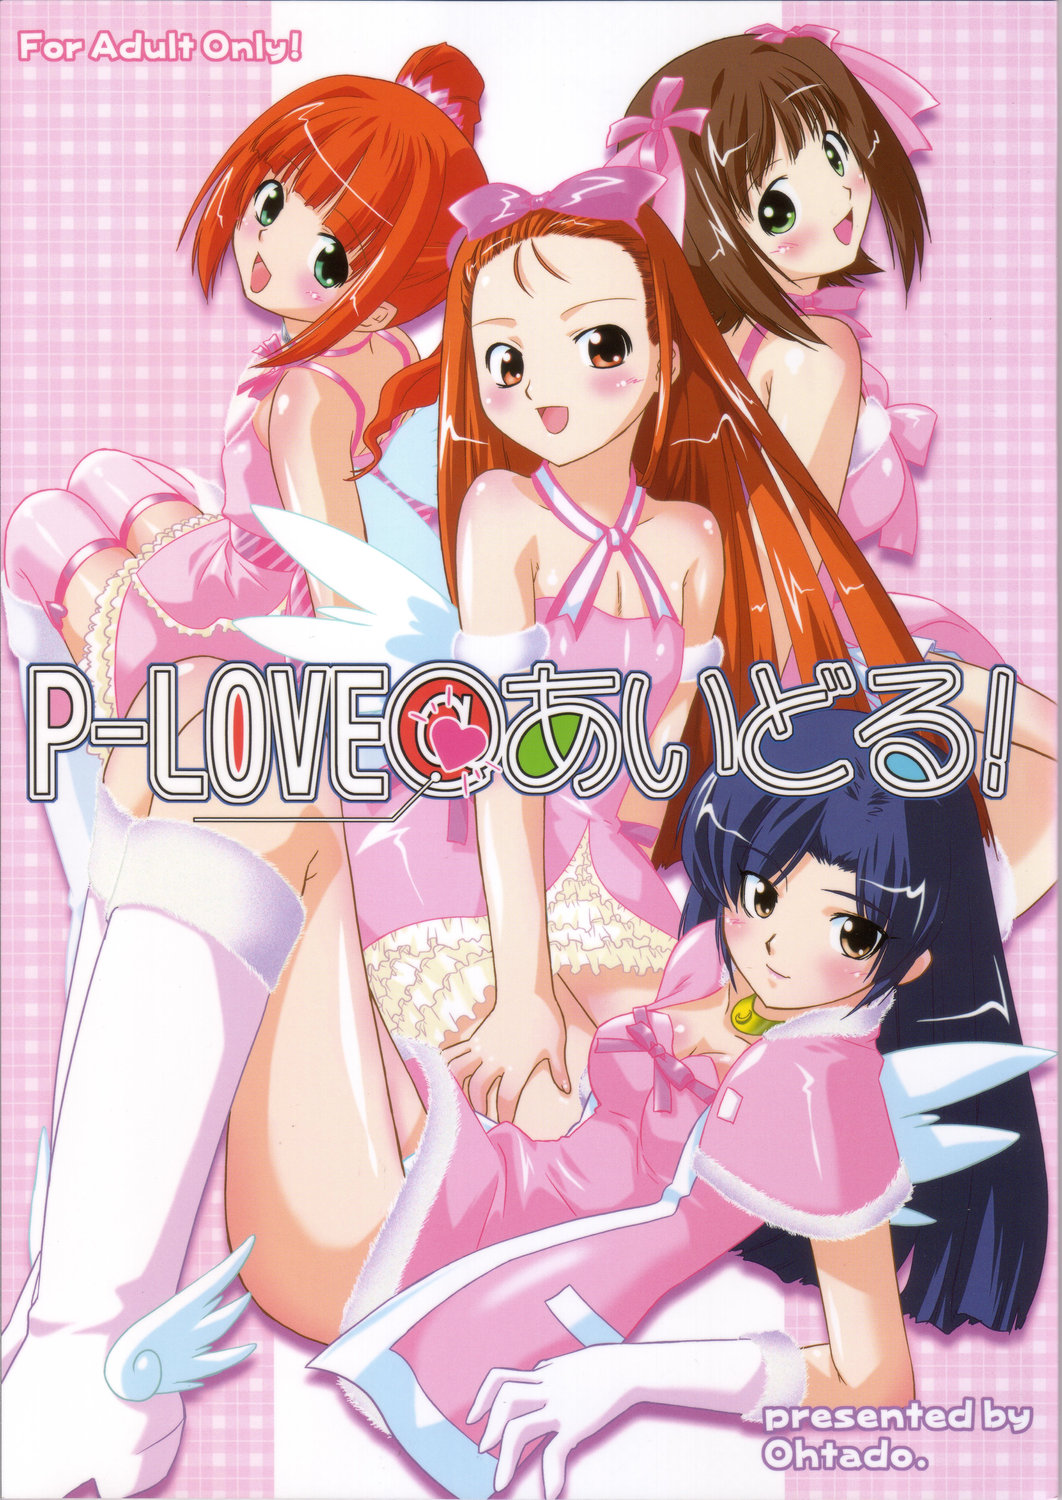 (SC34) [Ohtado (Oota Takeshi)] P-LOVE＠Idol! (THE iDOLM@STER) page 1 full